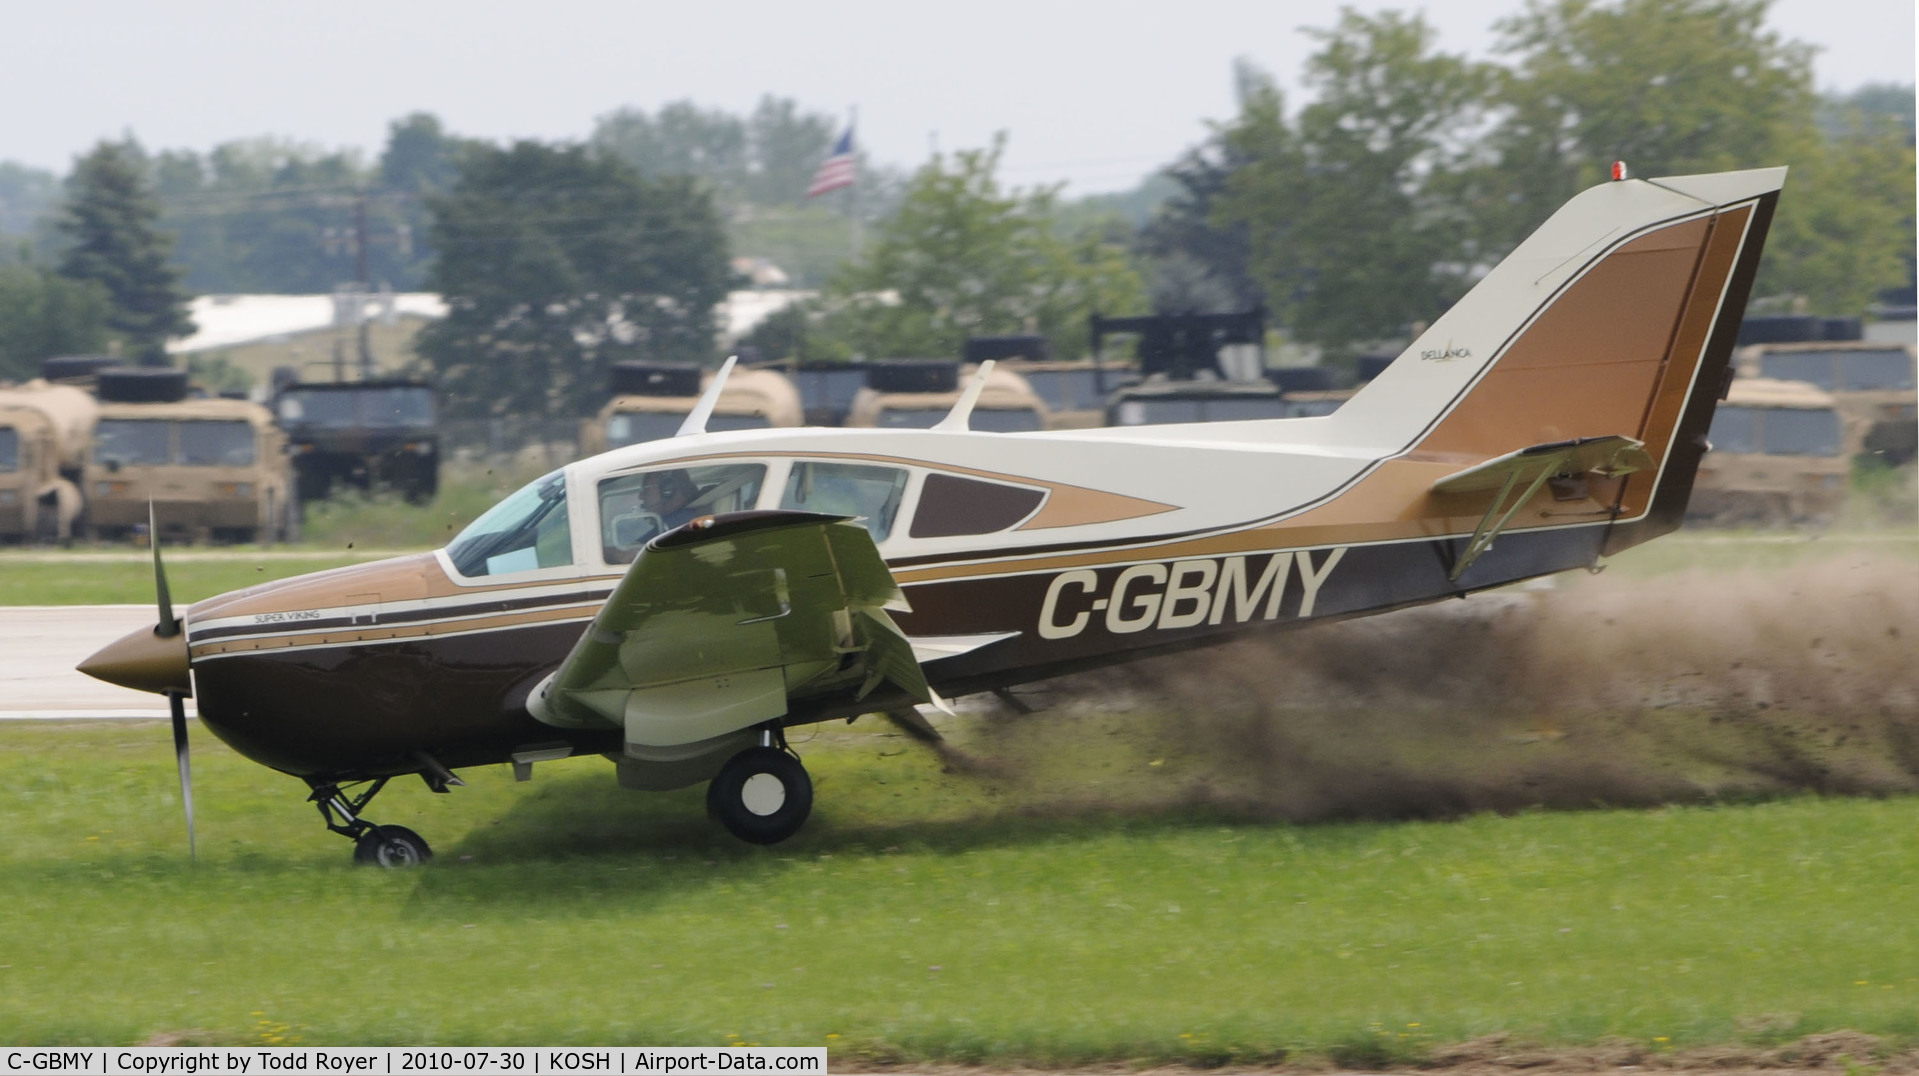 C-GBMY, 1974 Bellanca 17-30A Viking C/N 75-30744, EAA AIRVENUTRE 2010, Nose gear failed to extend fully causing aircraft to vear left of runway, aircraft stopped upright, did not appear to be any injuries.